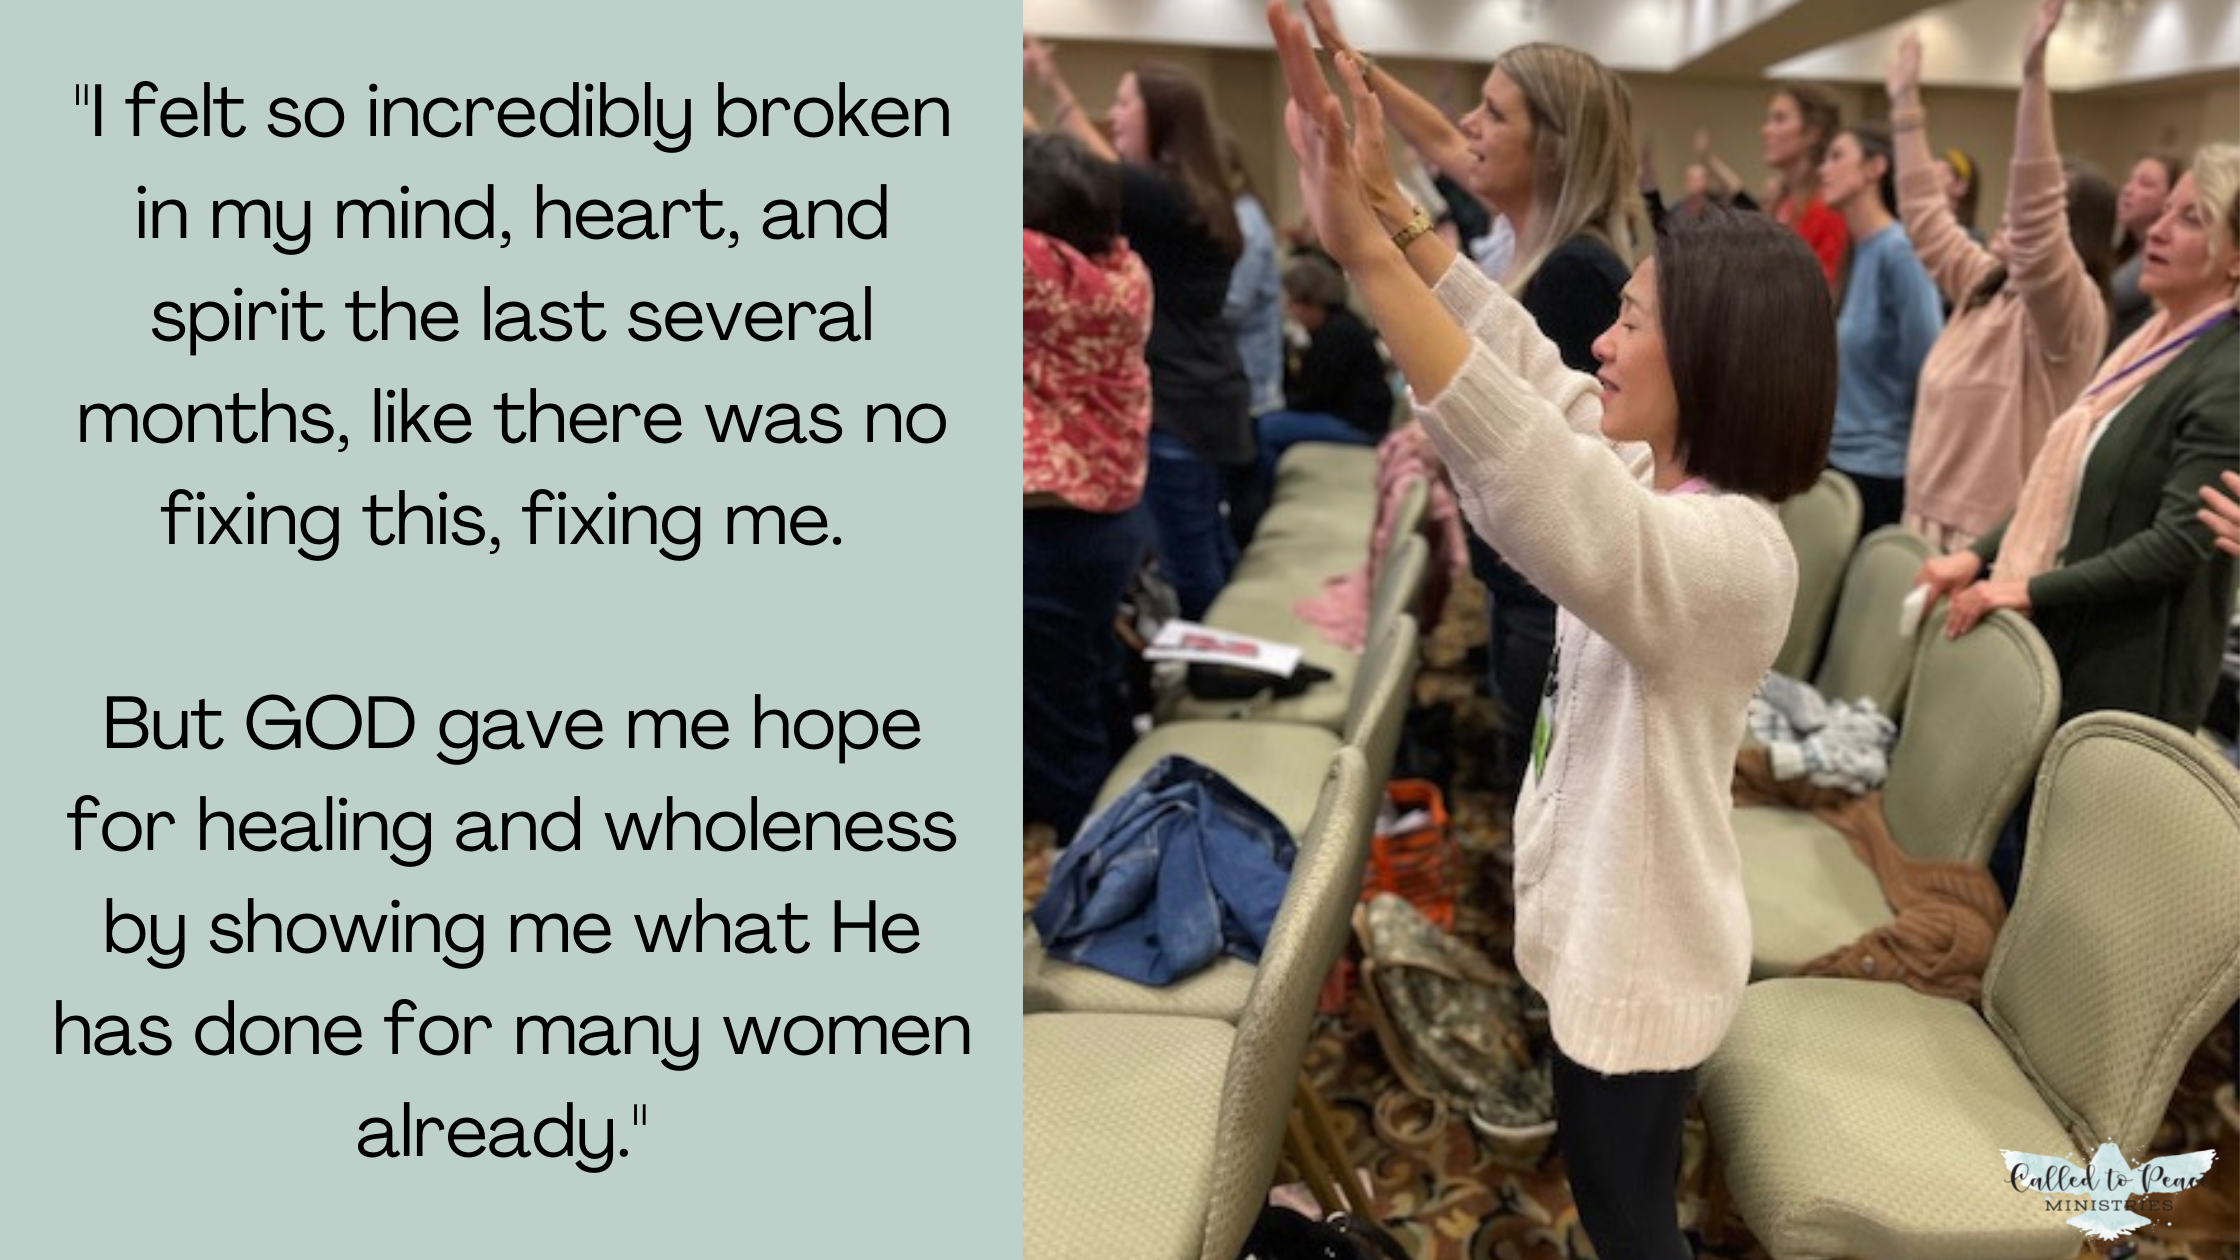 “Heather” Finds Peace and Freedom at the Women’s Retreat